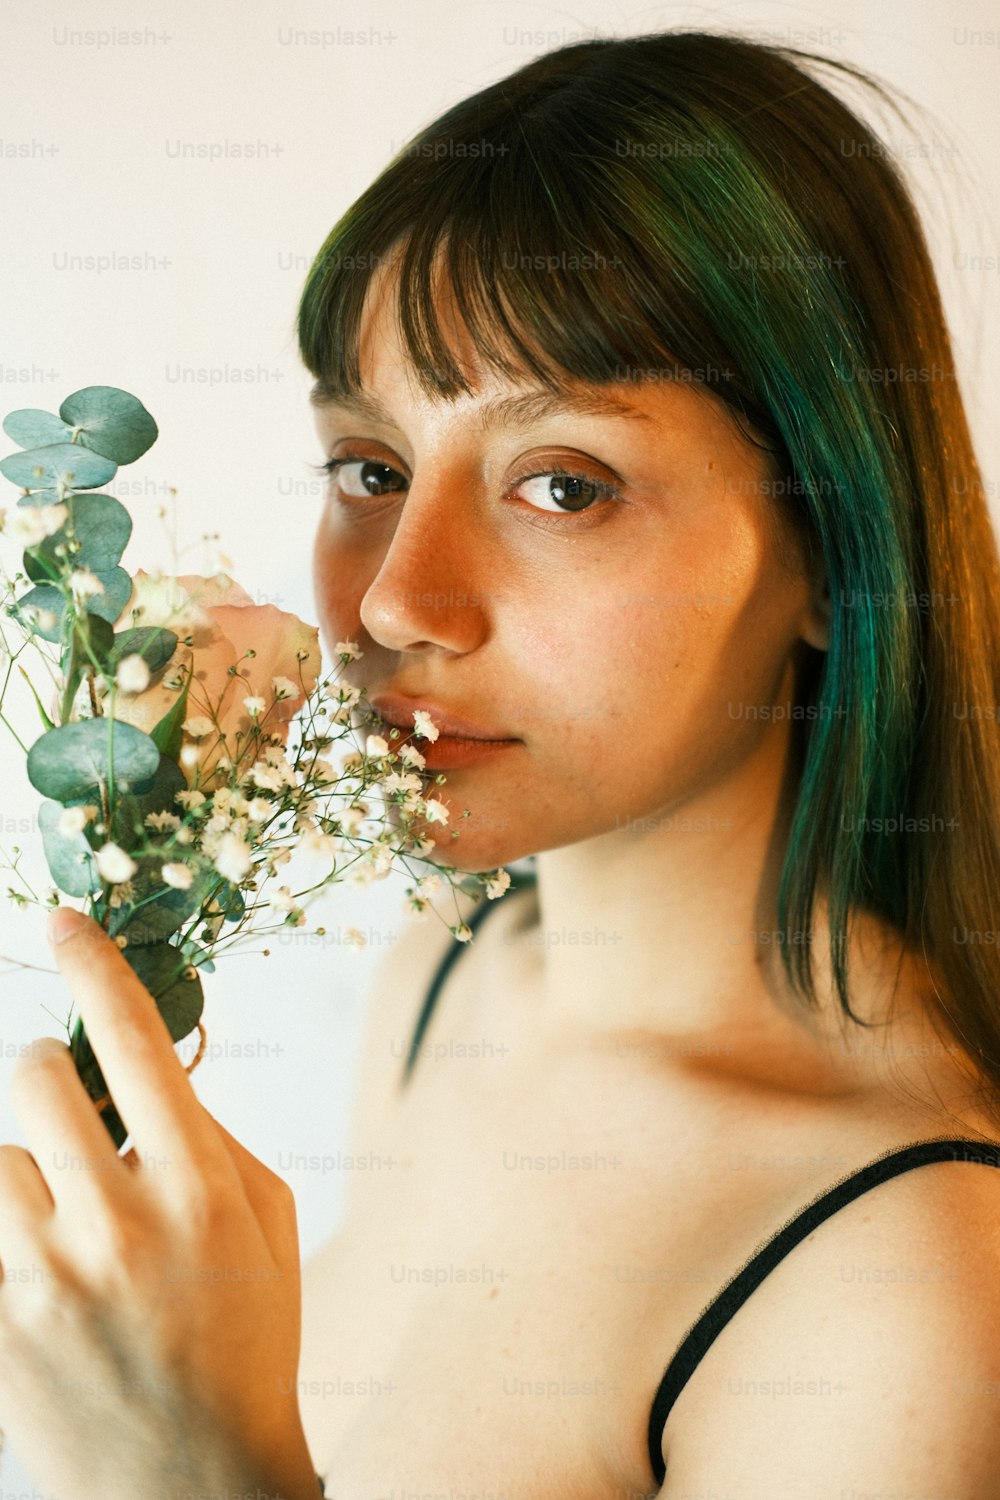 a woman with green hair holding a bunch of flowers